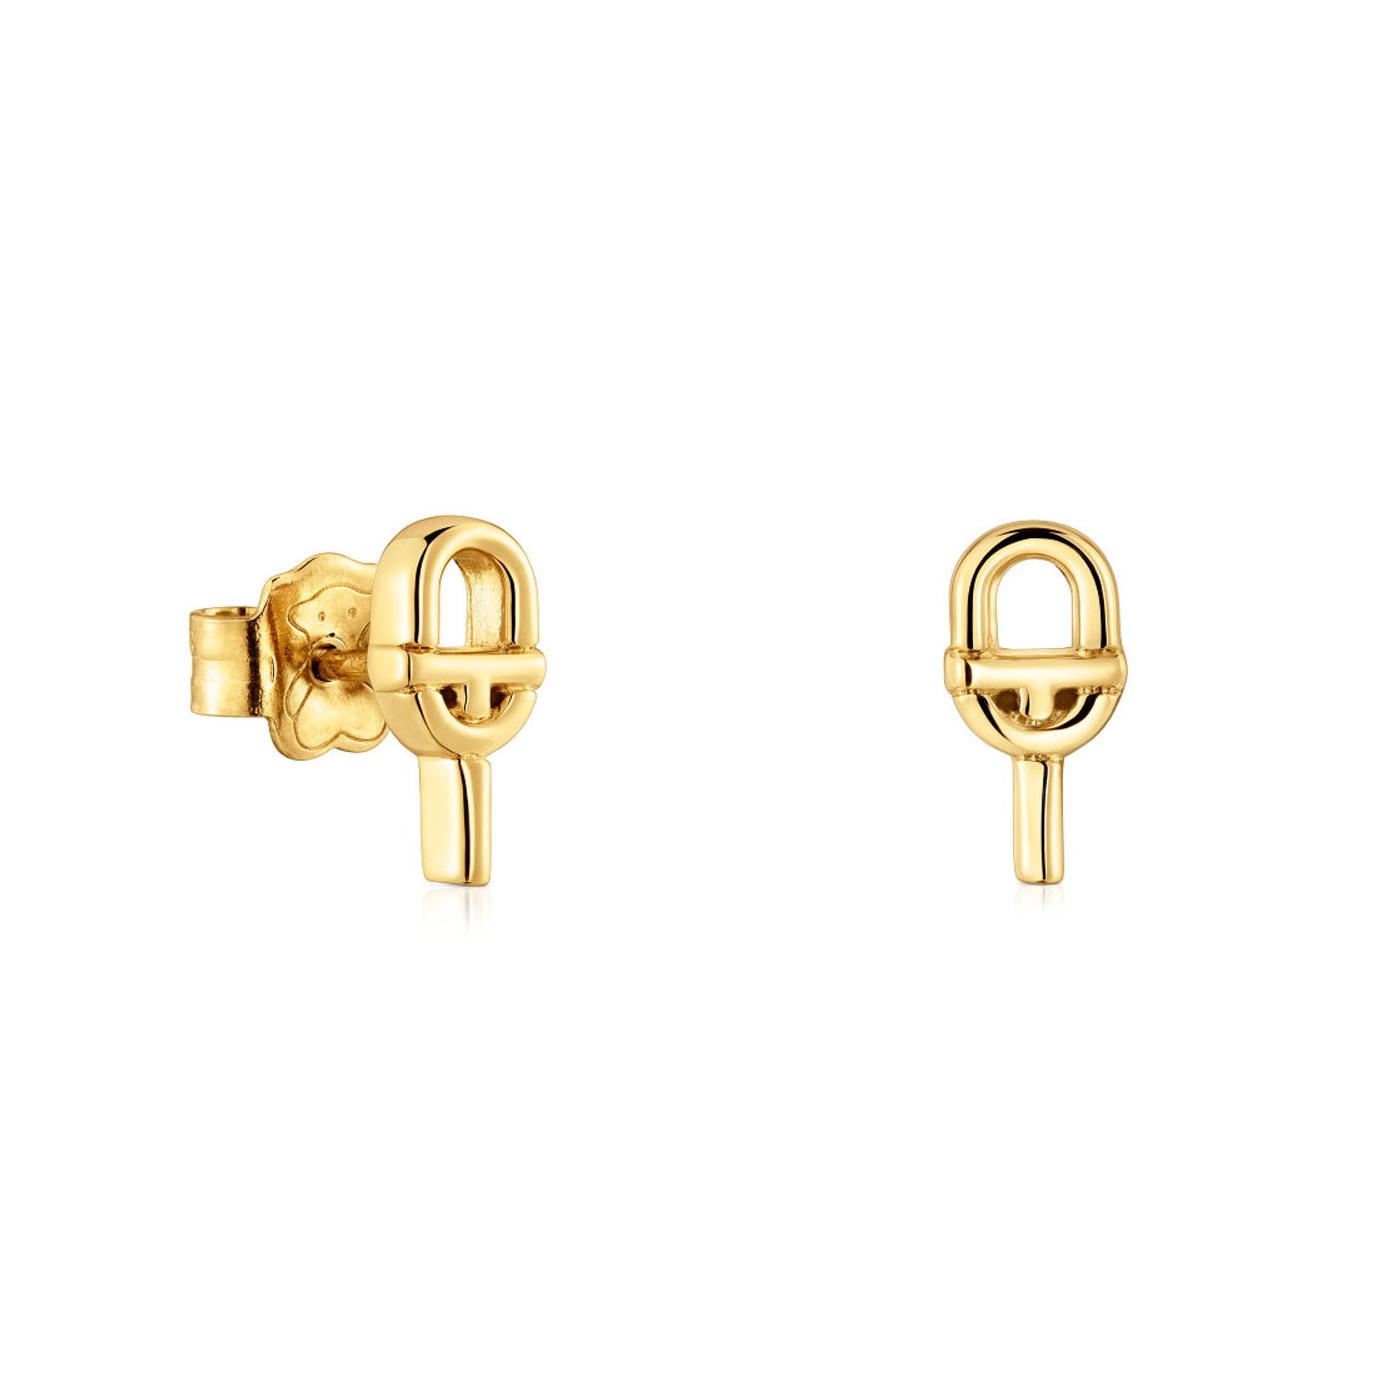 TOUS Manifesto Gold-Plated Stud Earrings